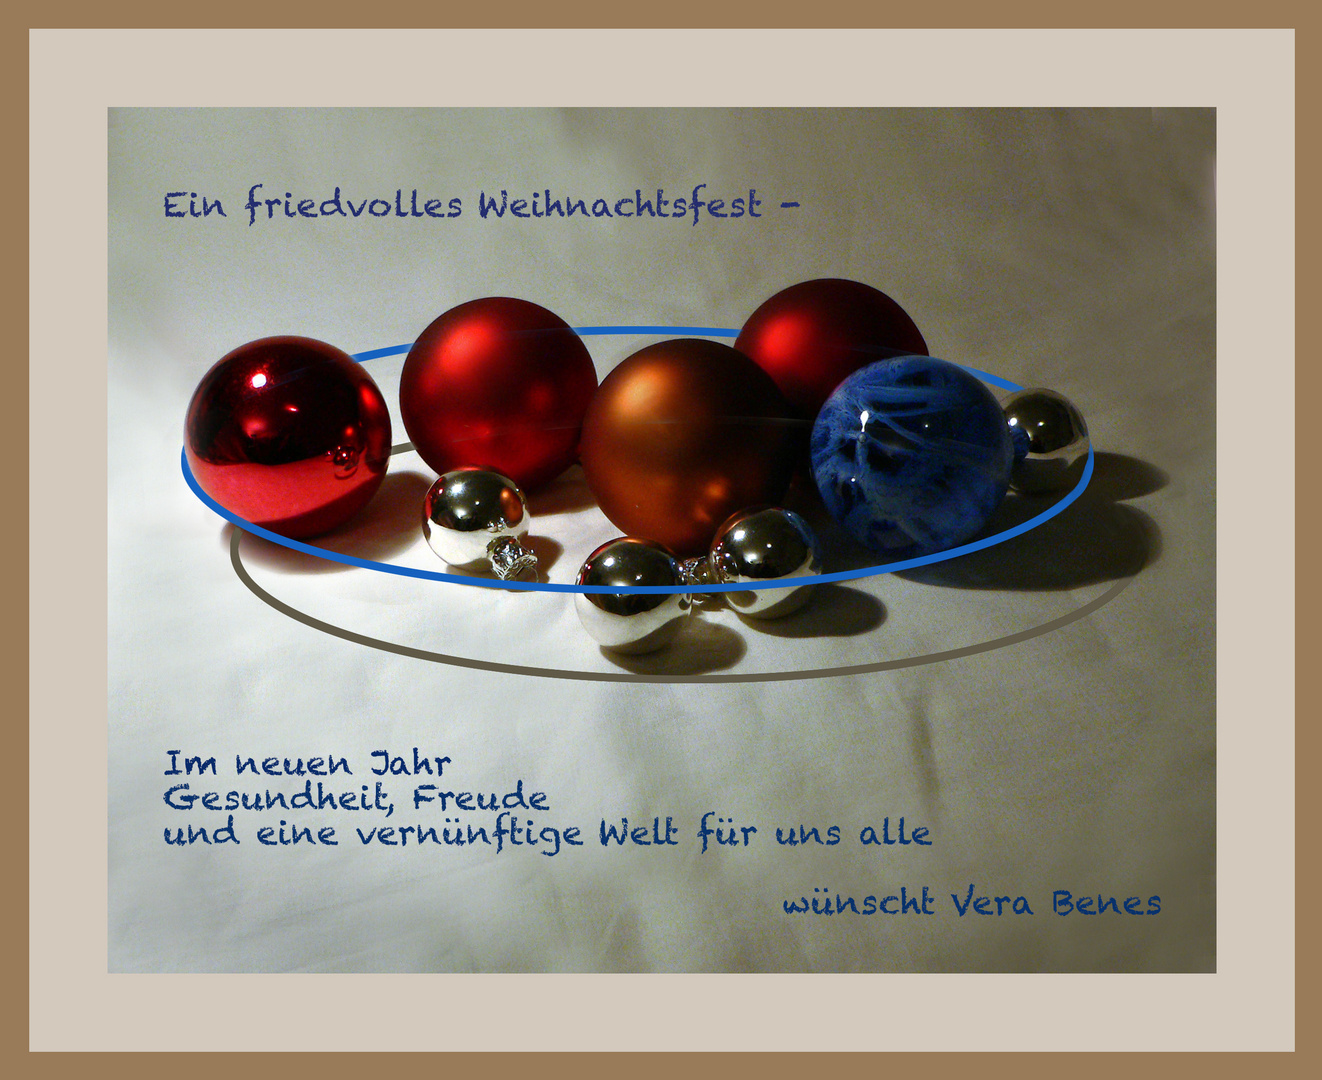 Ich wünsch´ you a merry Christmas and a happy new Year